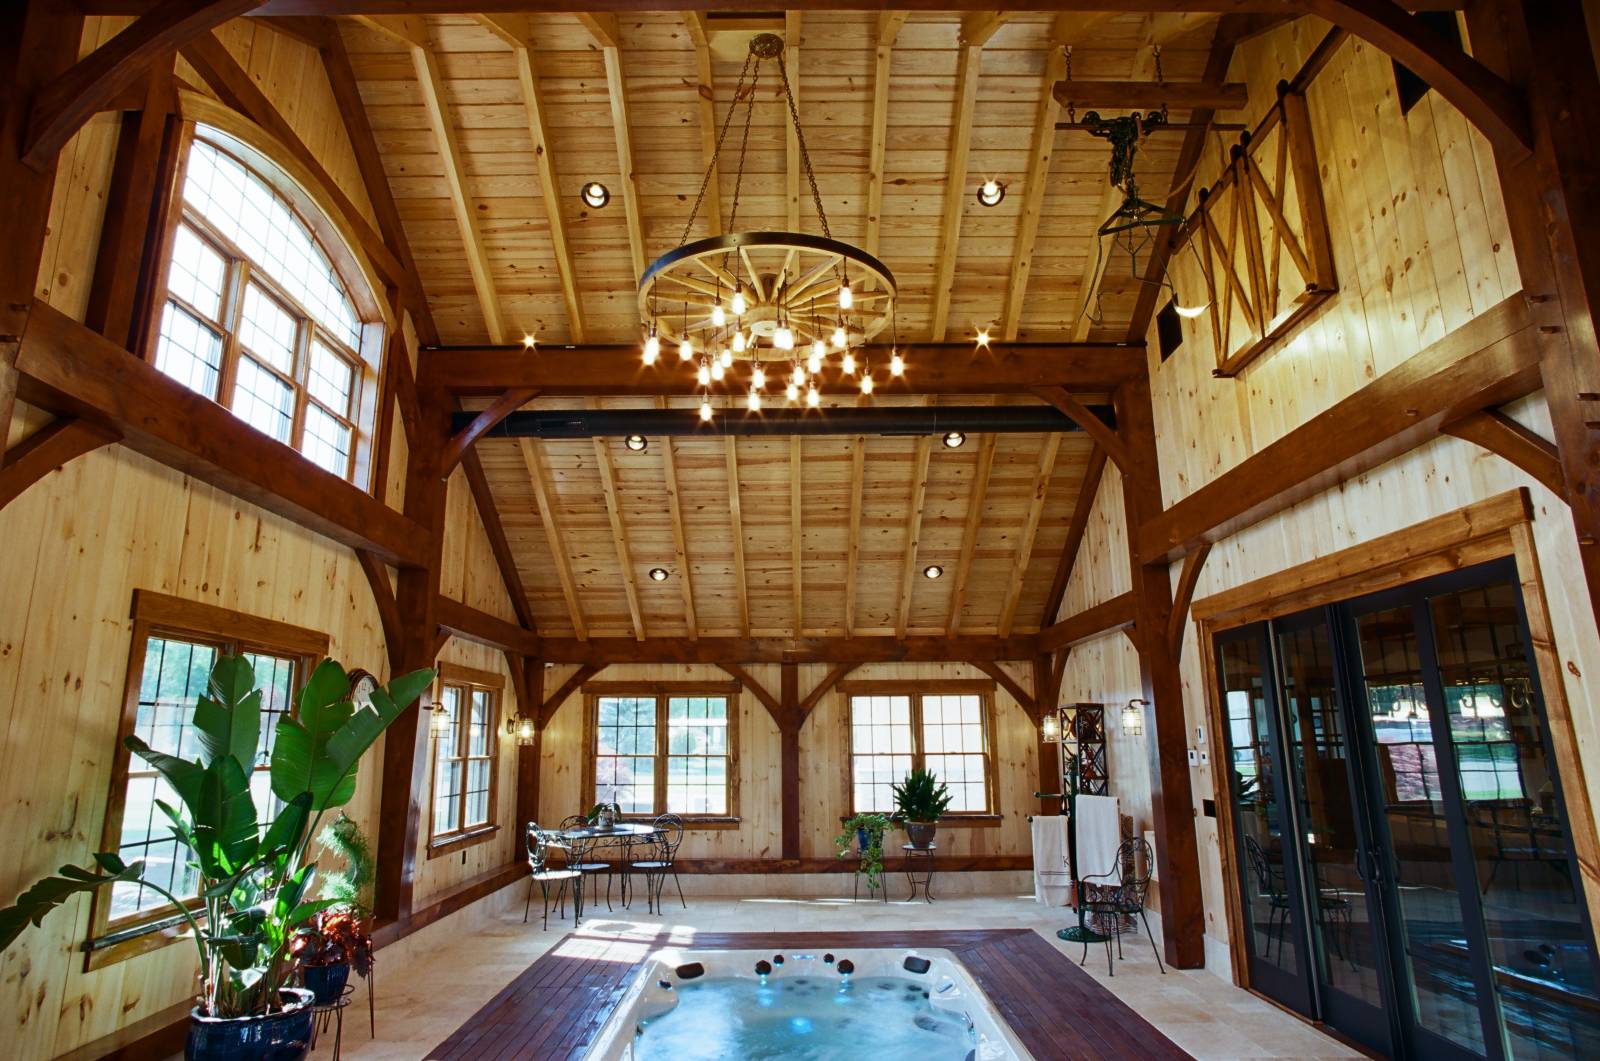 Timber Frame Pool Room • Timber Frame Enclosed Pool • Exposed Beams